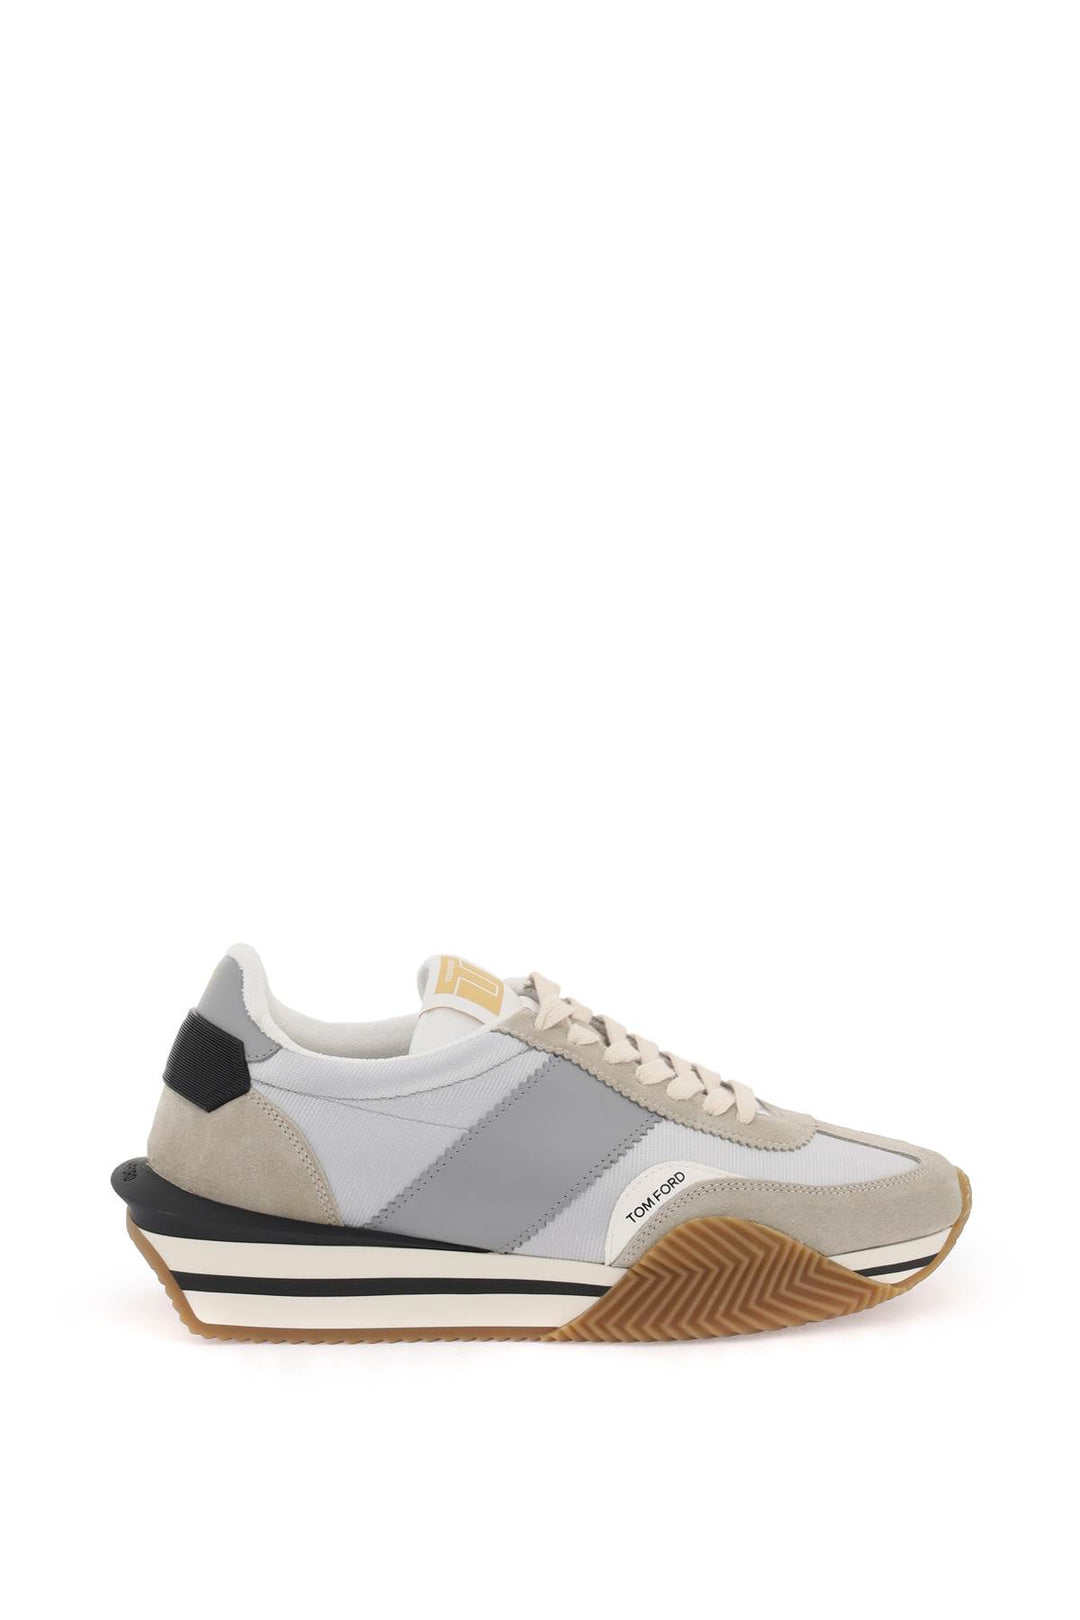 Tom Ford James Sneakers In Lycra And Suede Leather   Beige